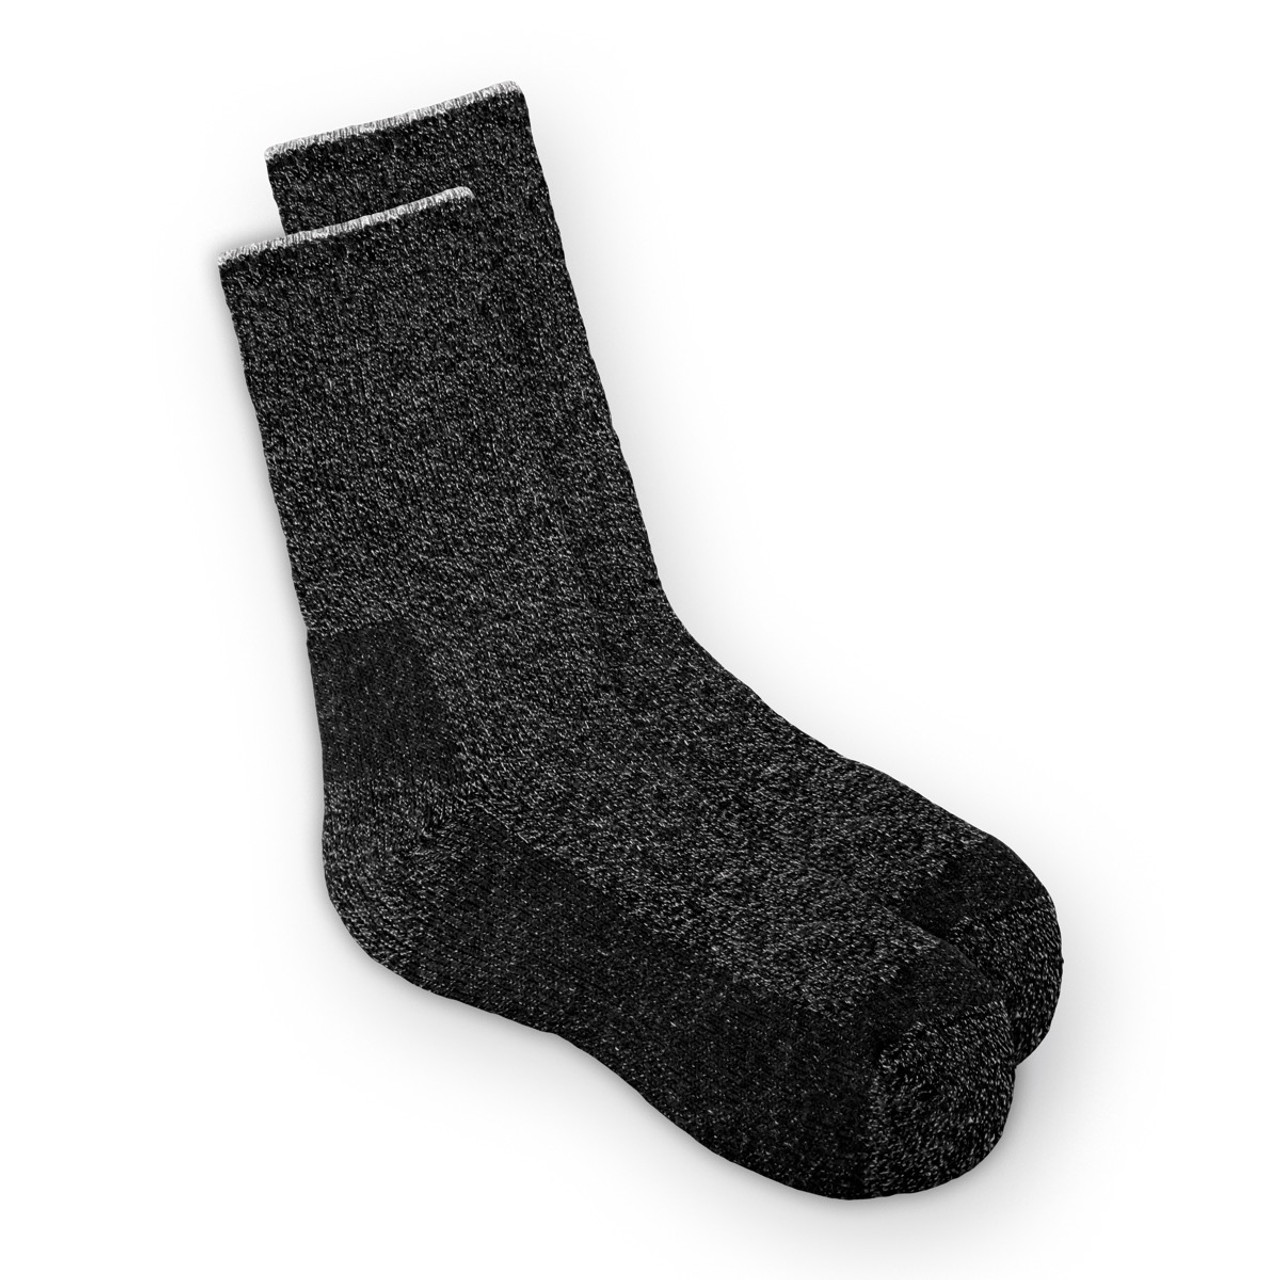 Don't Get Cold Feet this Winter with Thermal Socks - EcoSox